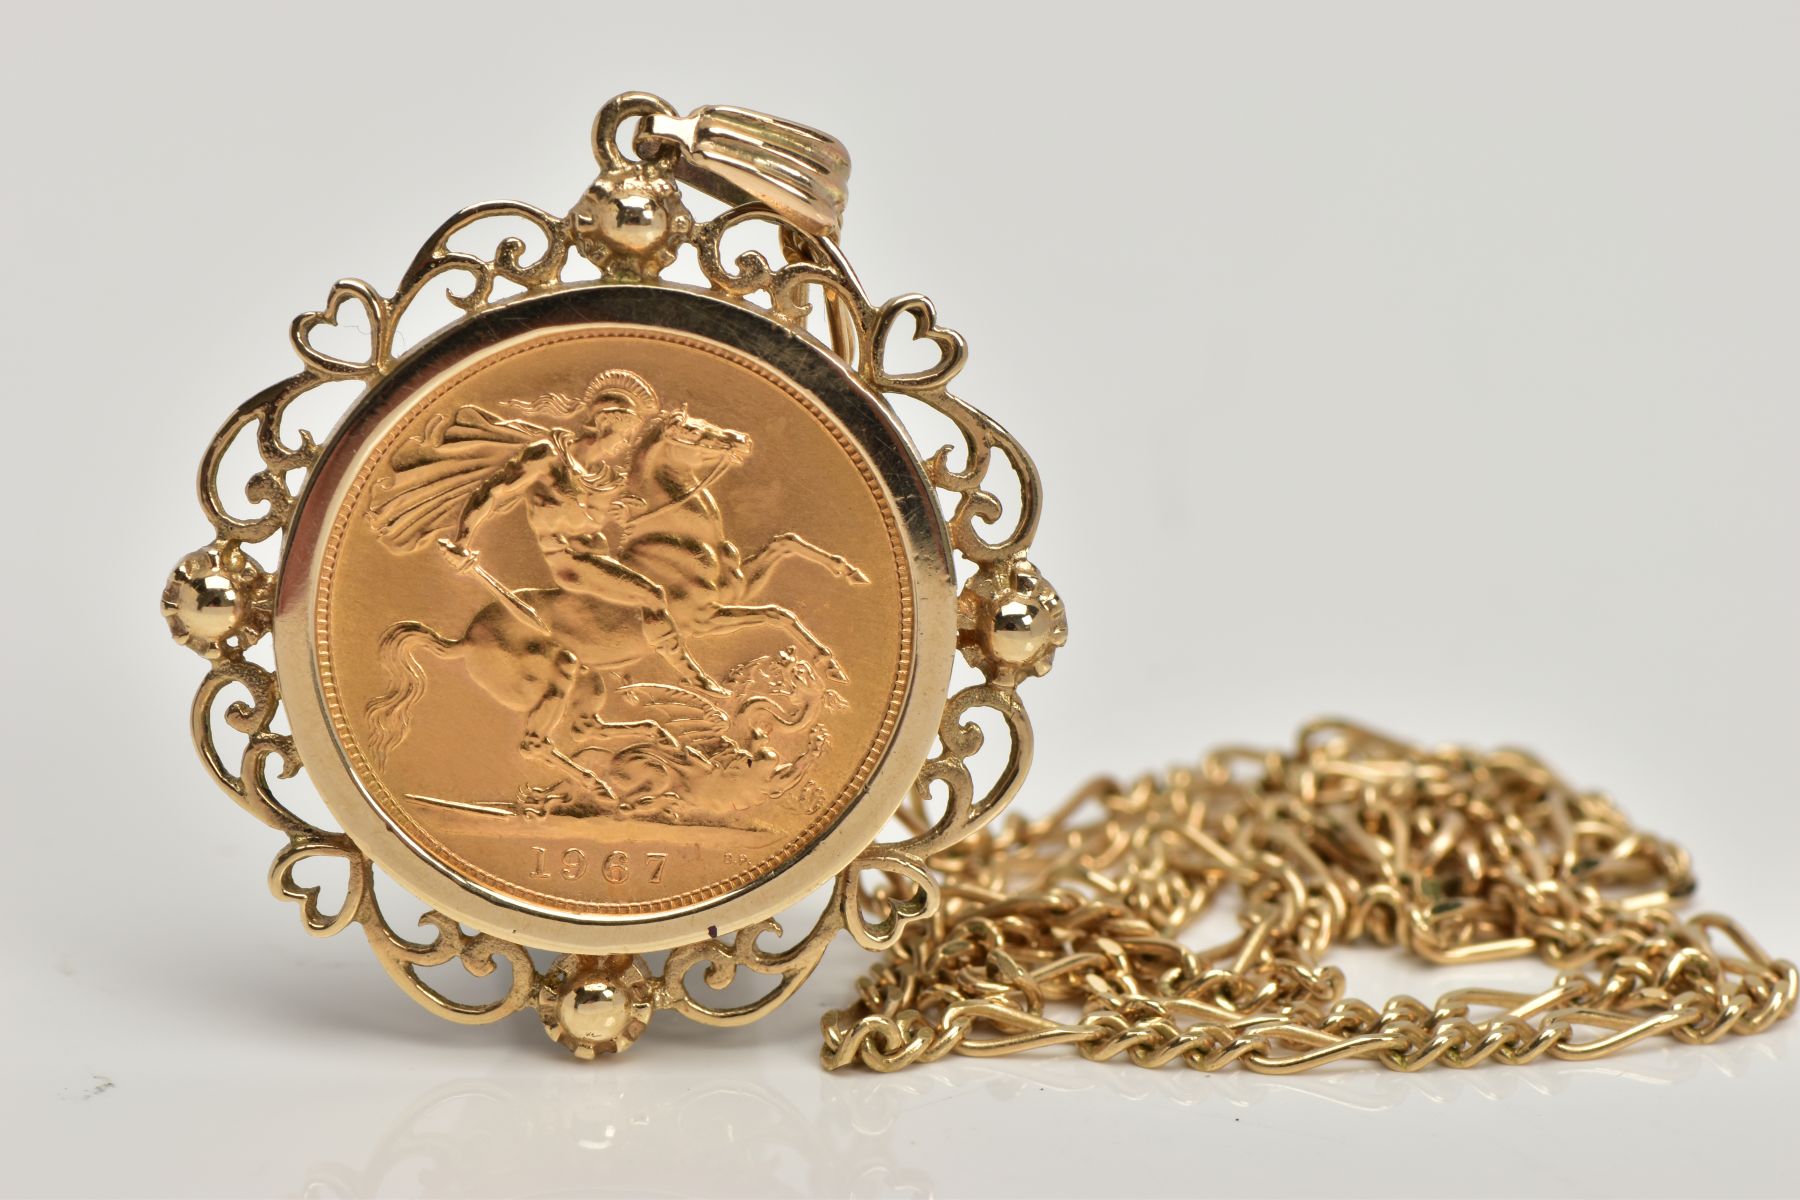 A MOUNTED FULL SOVEREIGN PENDANT AND CHAIN, sovereign depicting Queen Elizabeth II, George and the